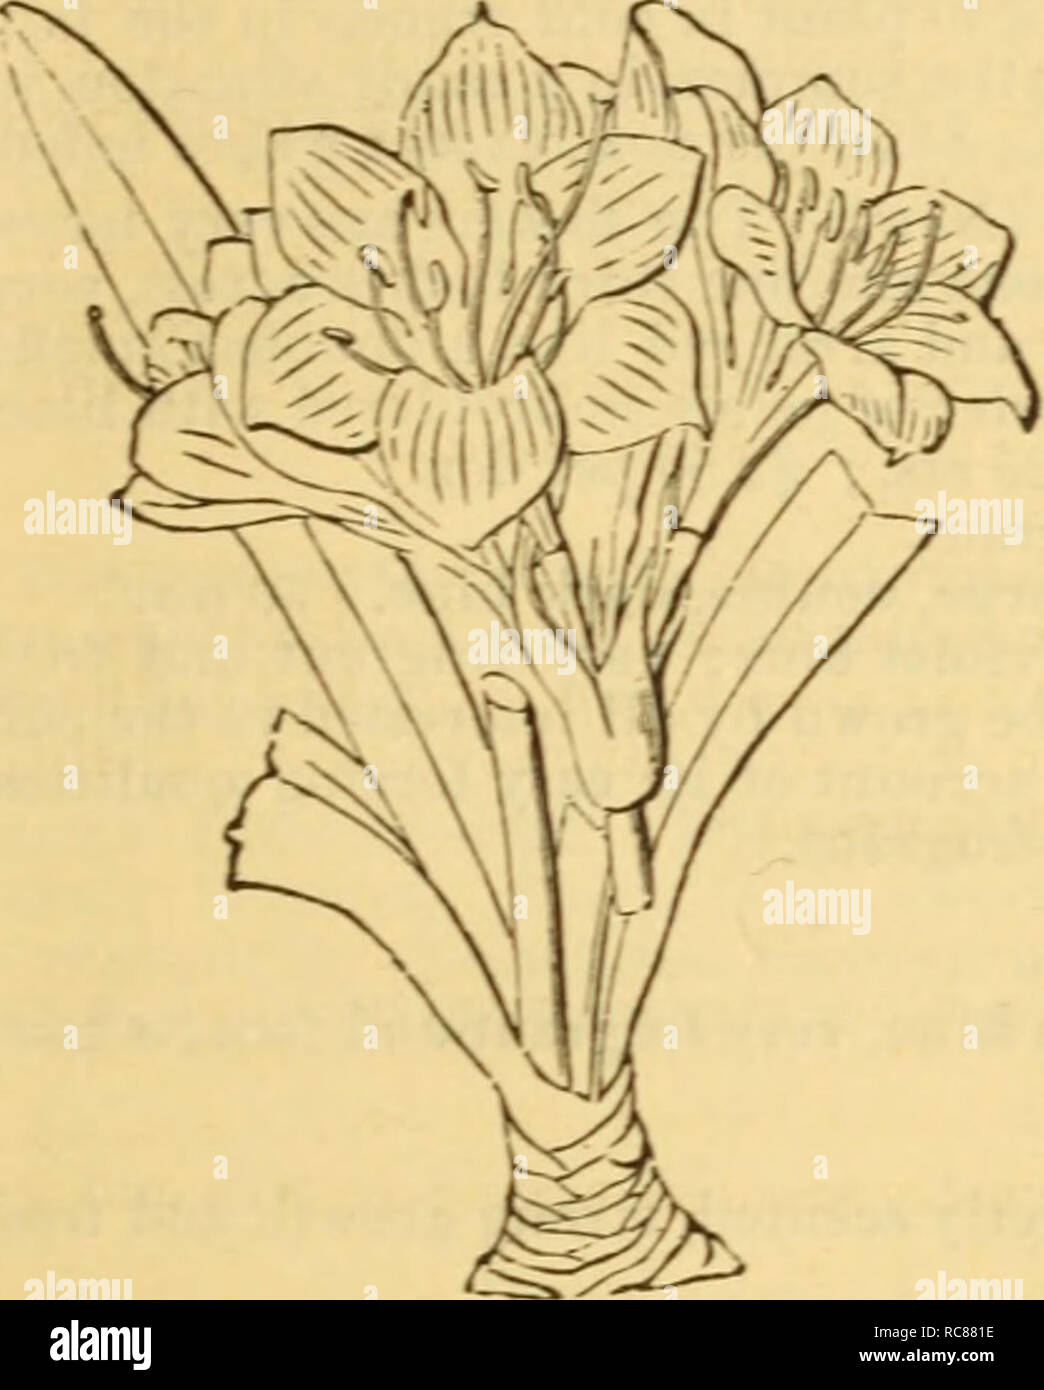 . Dreer's garden calendar : 1879. Seeds Catalogs; Nursery stock Catalogs; Gardening Catalogs; Flowers Seeds Catalogs. Dreer 's Garden Calendar, 121 TRADESCANTIA. Often called &quot; &quot;Wandering Jew,&quot; and verj- pretty for baskets and fountains, growing rapidly, with handsome foliage. 15 cts.; $1.50 per doz. Aquatica. Very small green leaves. Discolor. An upright growing sort, light green leaves, the under side violet-purple, good for a centre plant of baskets, etc.; strong grower. 30 cts. ViTTATA. Bright green, striped white. Zebbina. Leaves striped with silvery white on a dark ground. Stock Photo